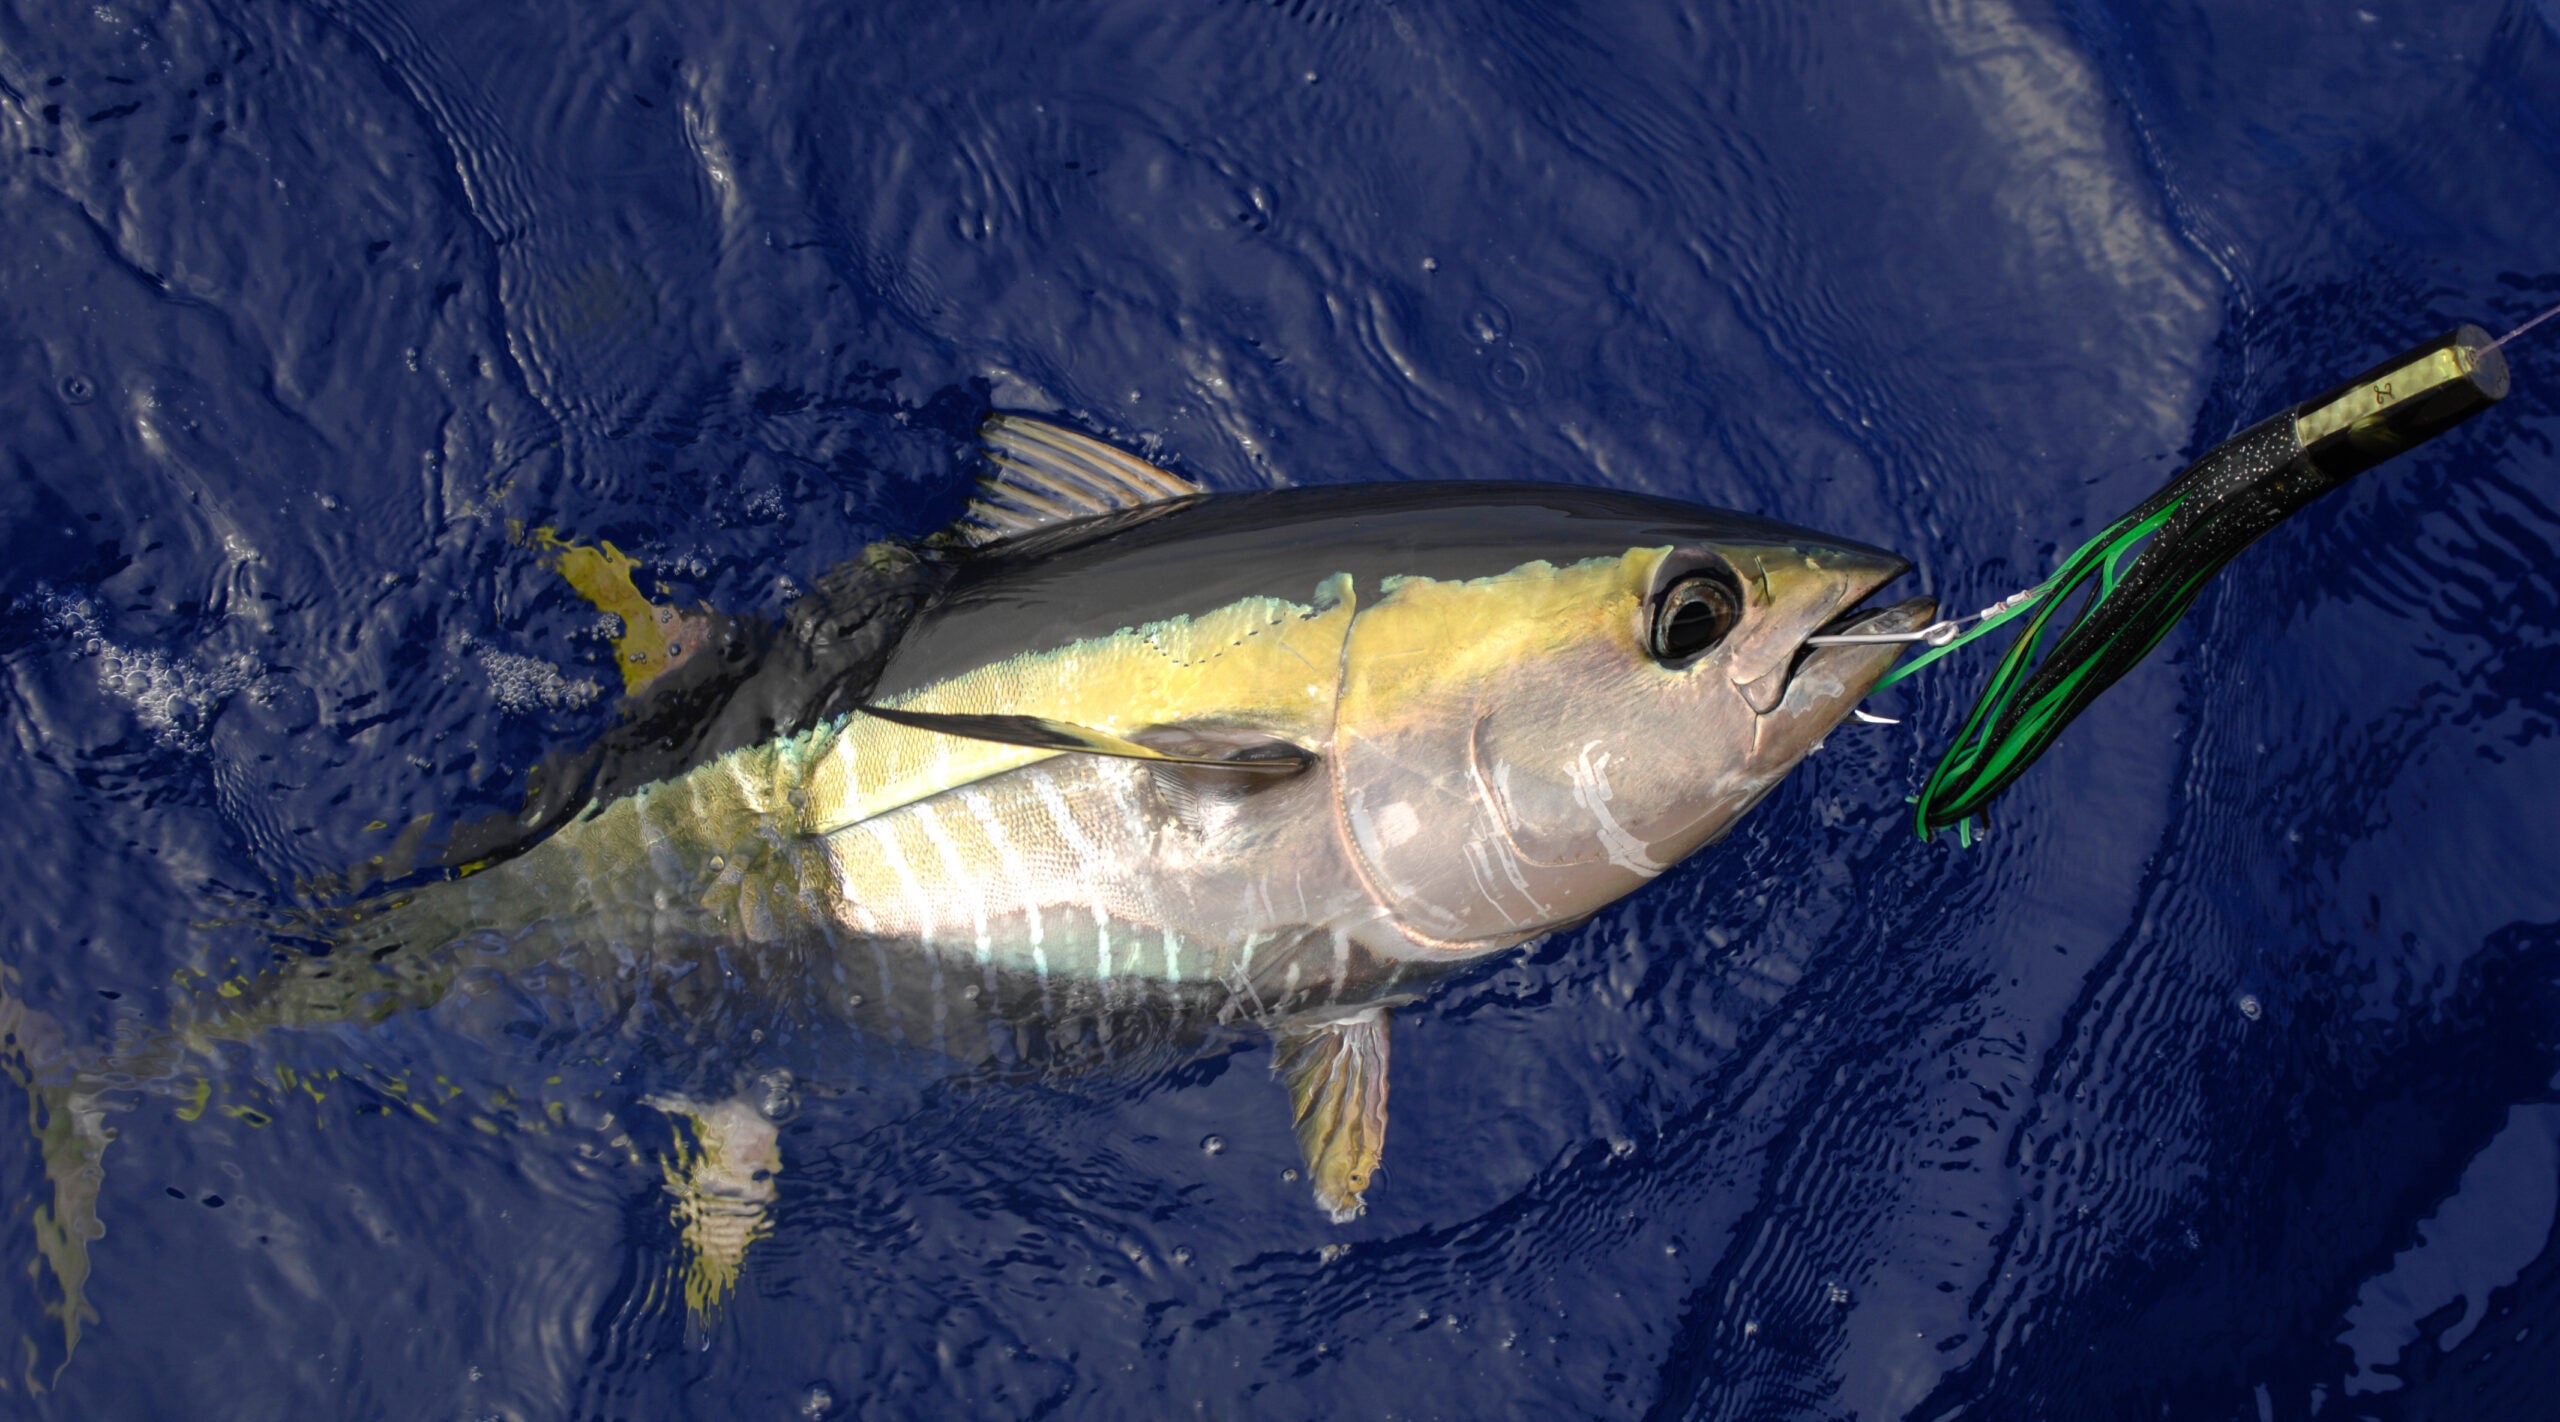 A yellowfin tuna with a fishing lure in its mouth